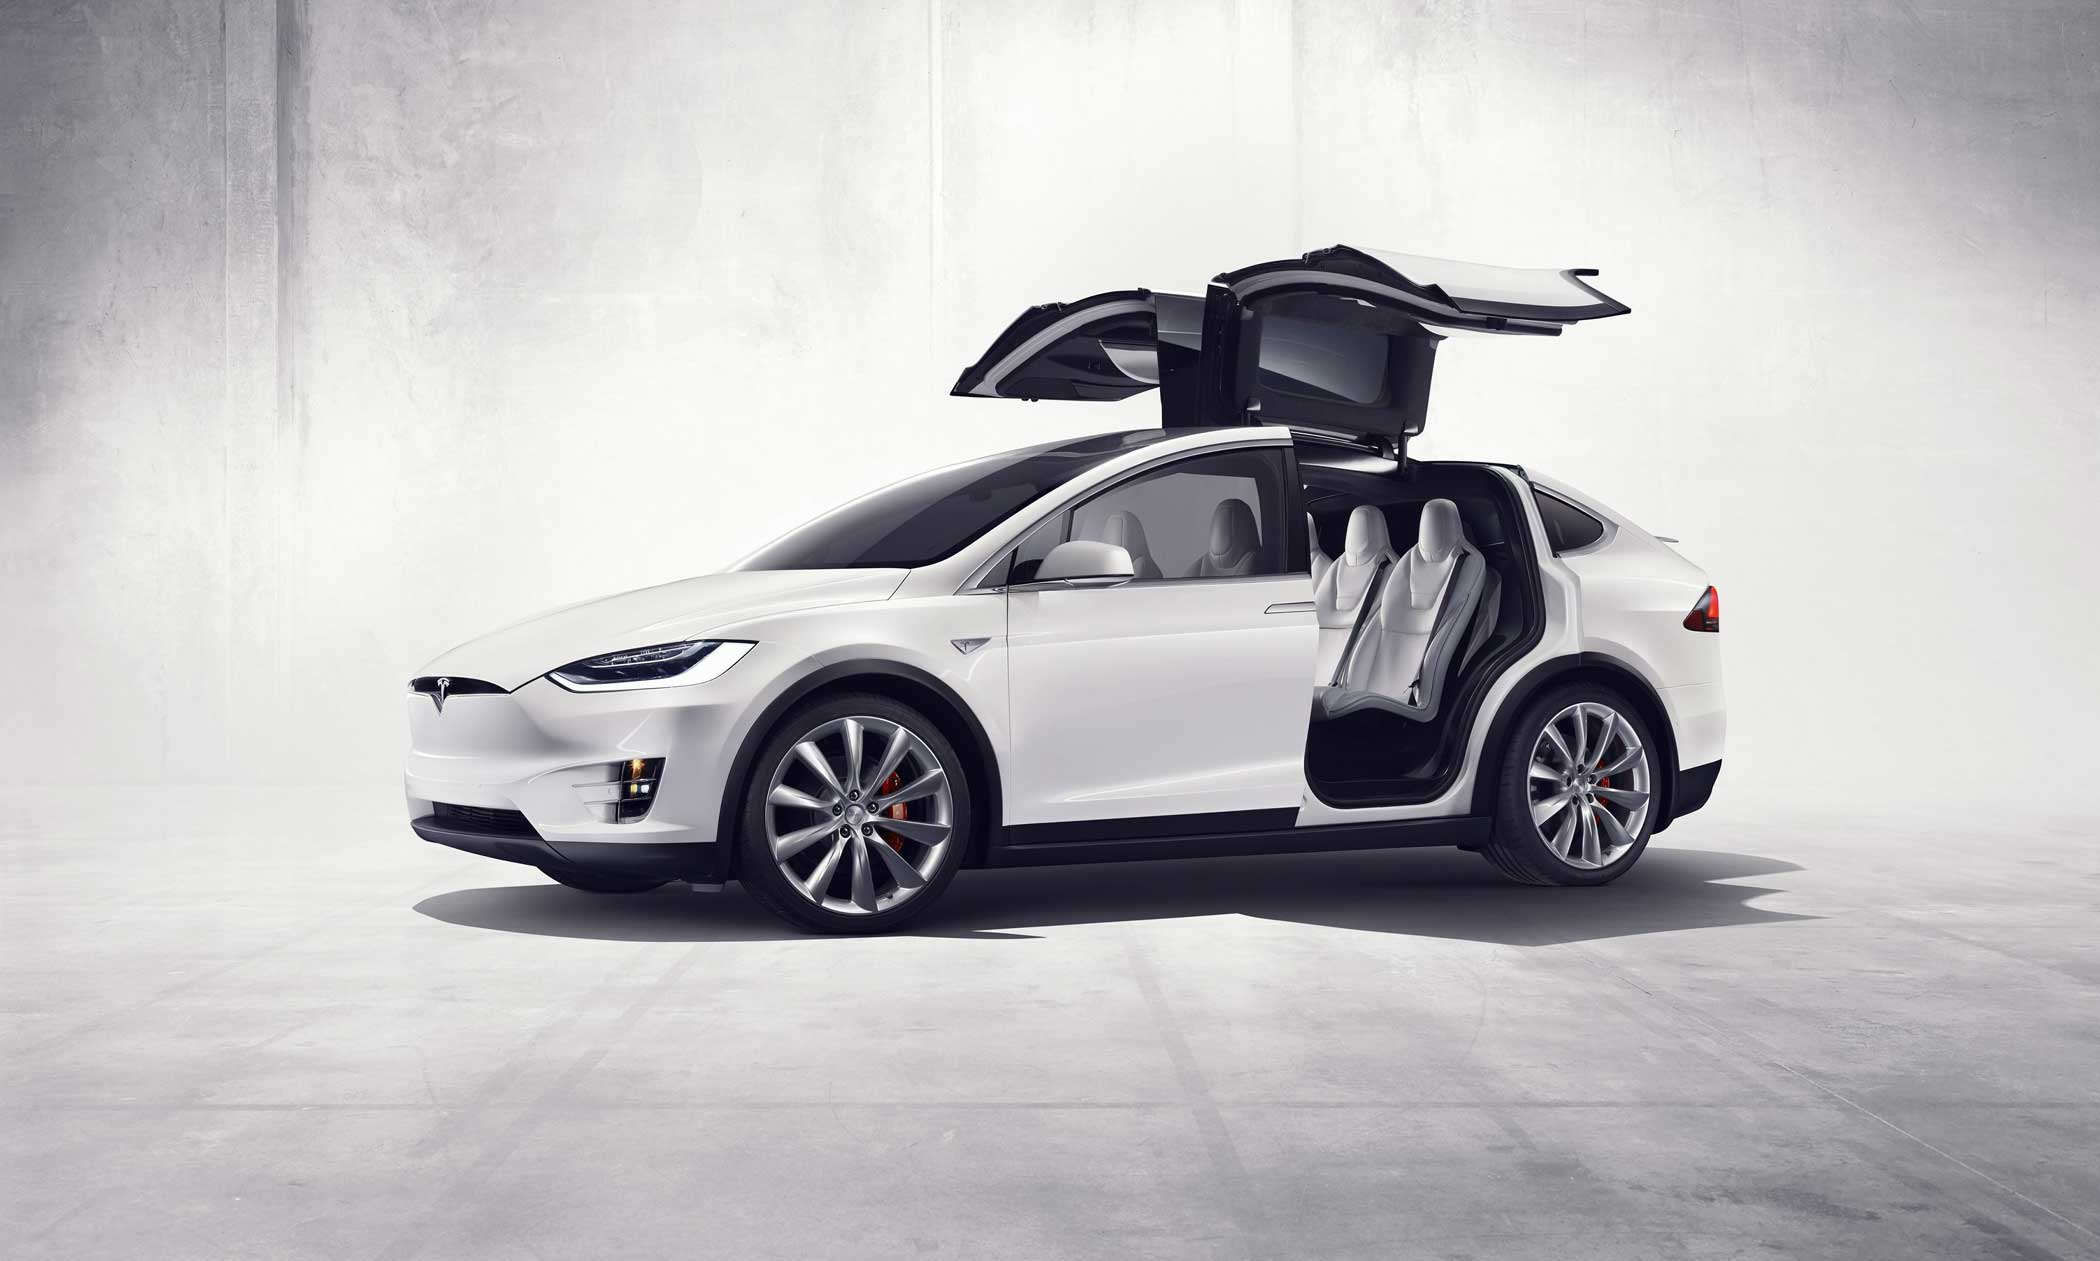 The Tesla Model X was released on Sept. 30, 2015. It's the company's first SUV.